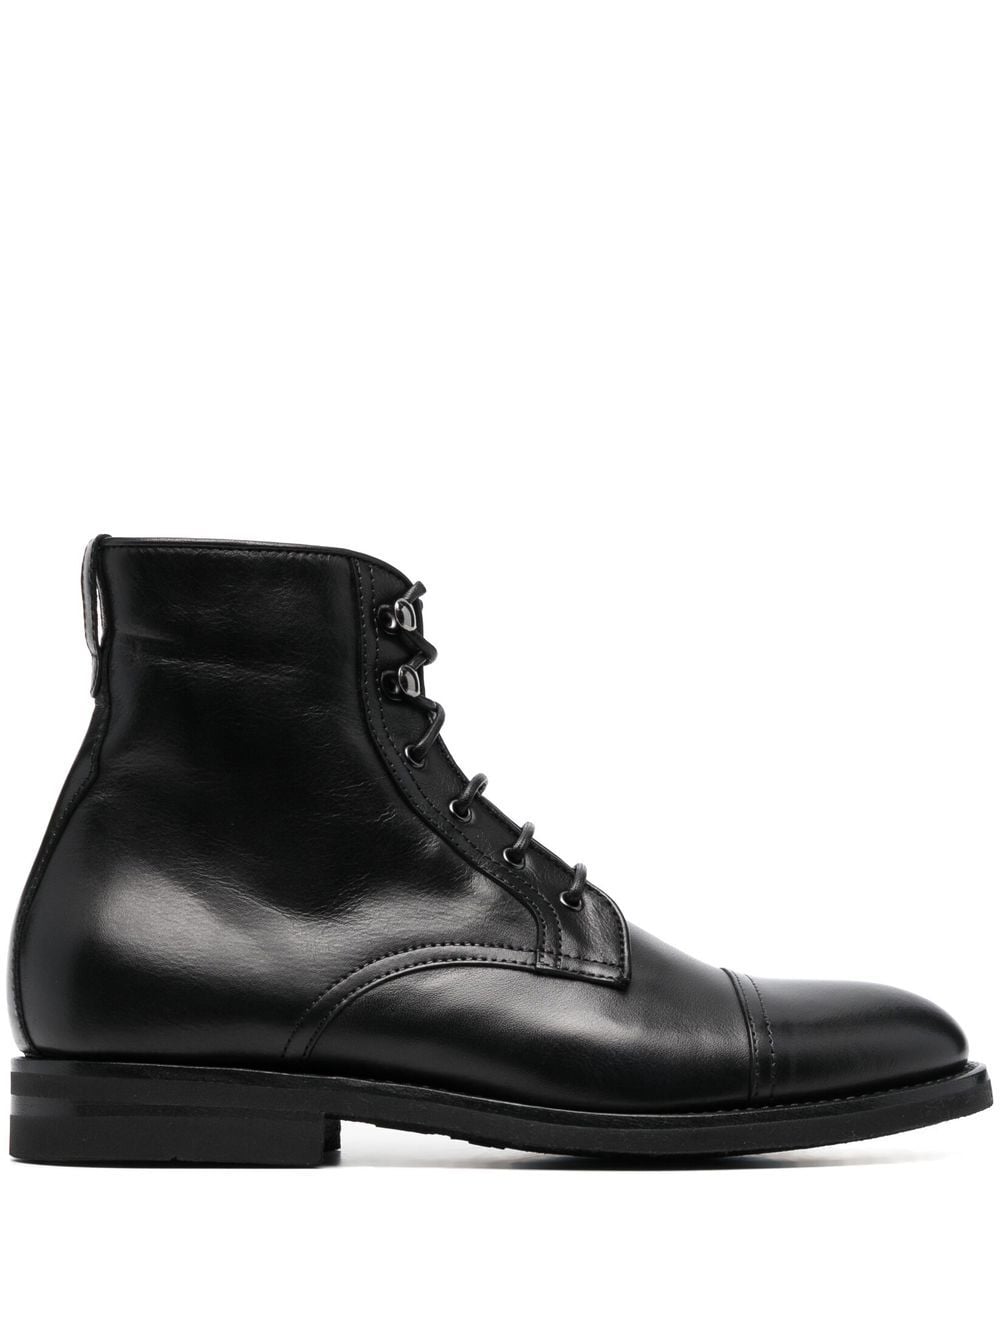 Scarosso Paola Lace-up Ankle Boots In Black - Calf